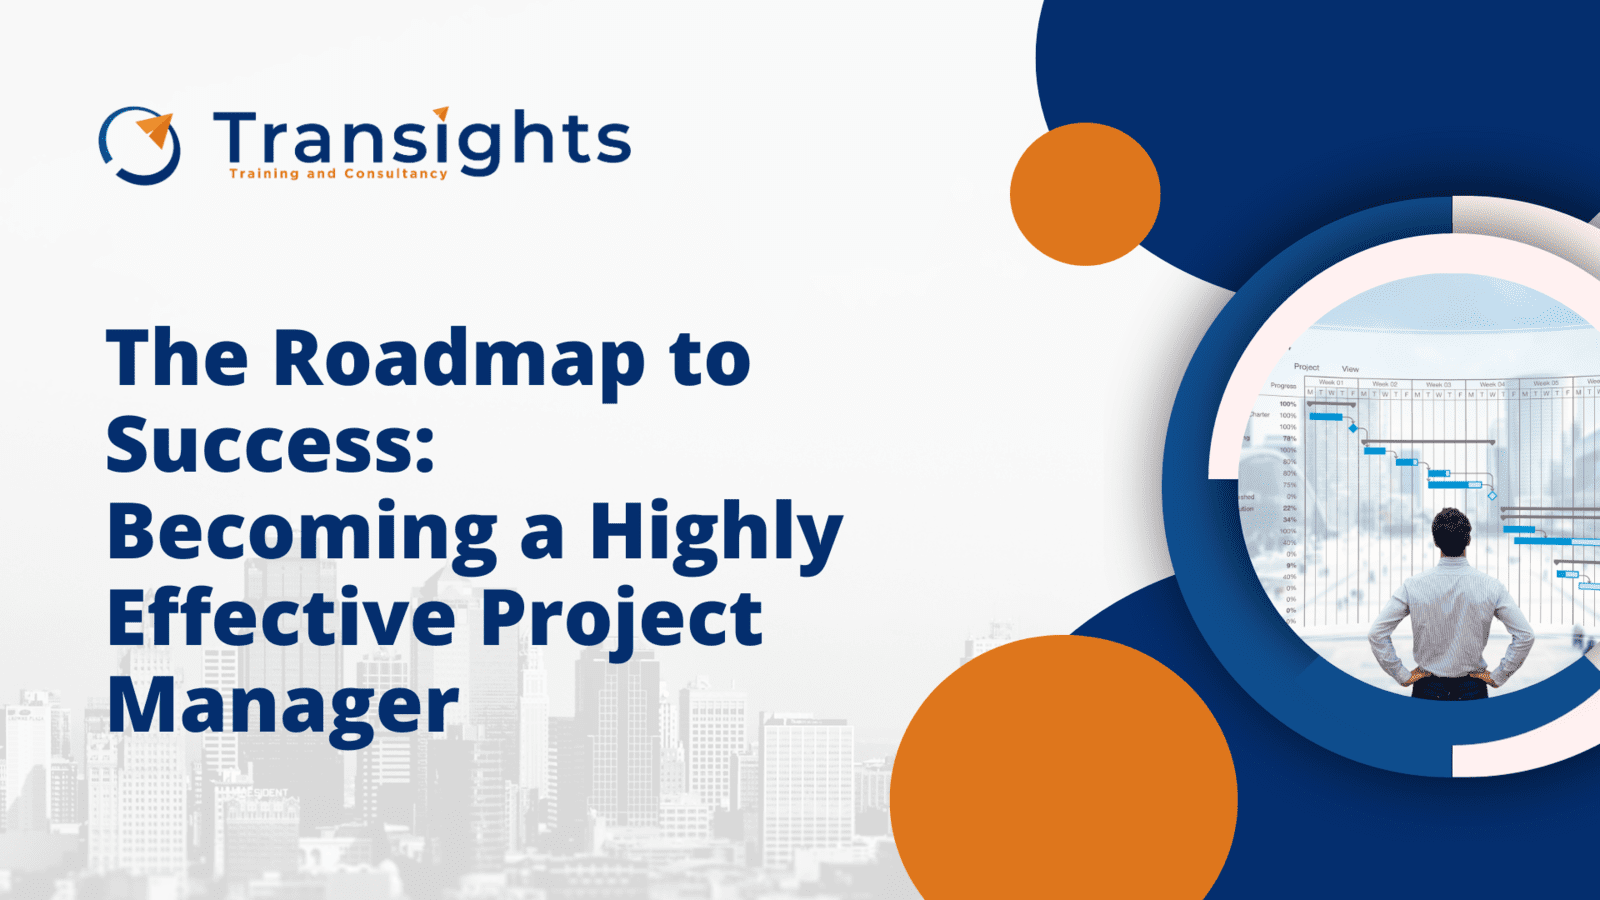 The Roadmap to Success: Becoming a Highly Effective Project Manager